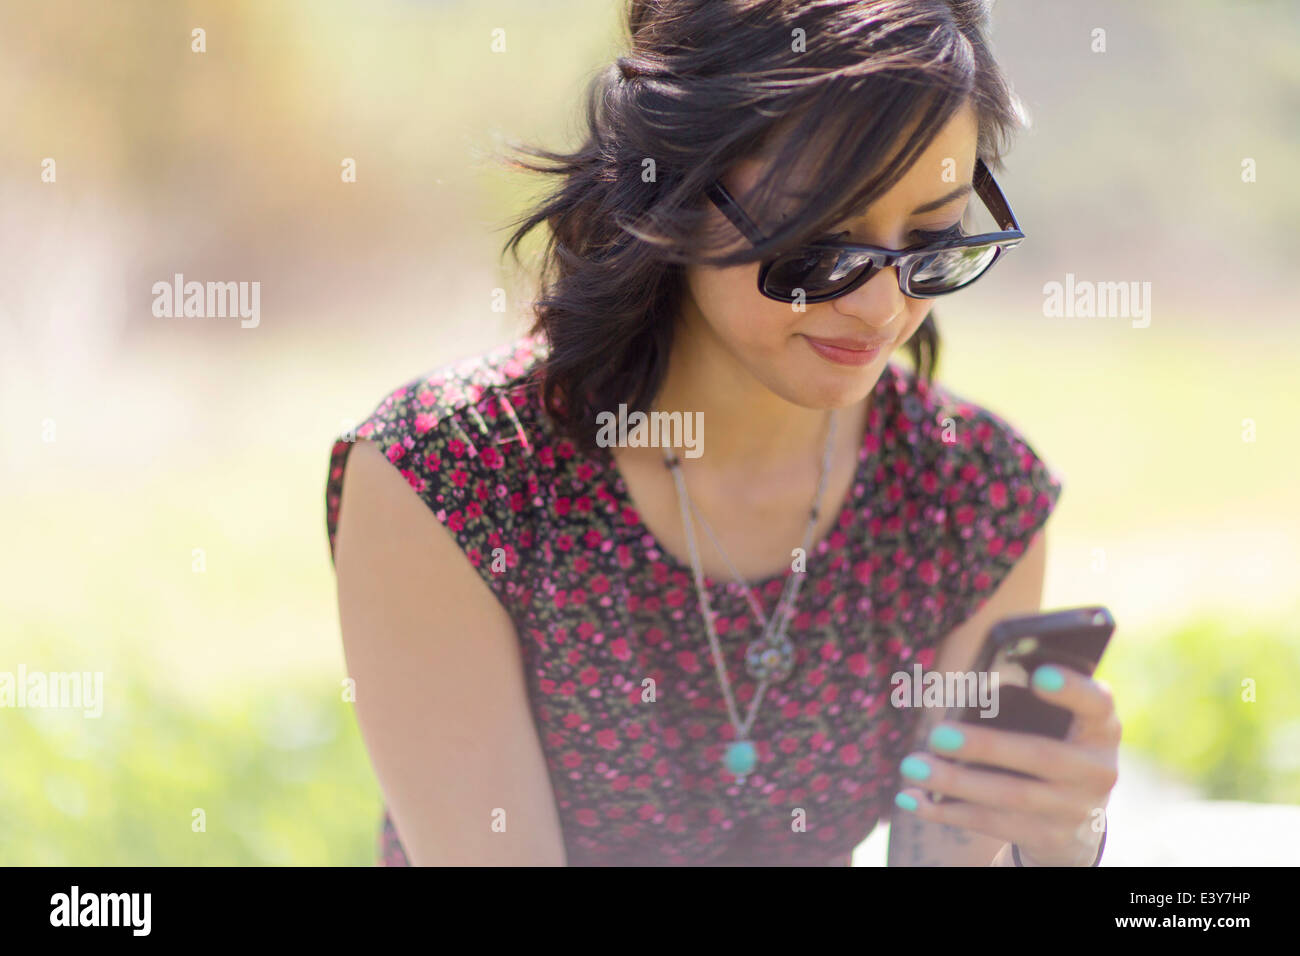 Young woman sitting in park with smartphone Stock Photo